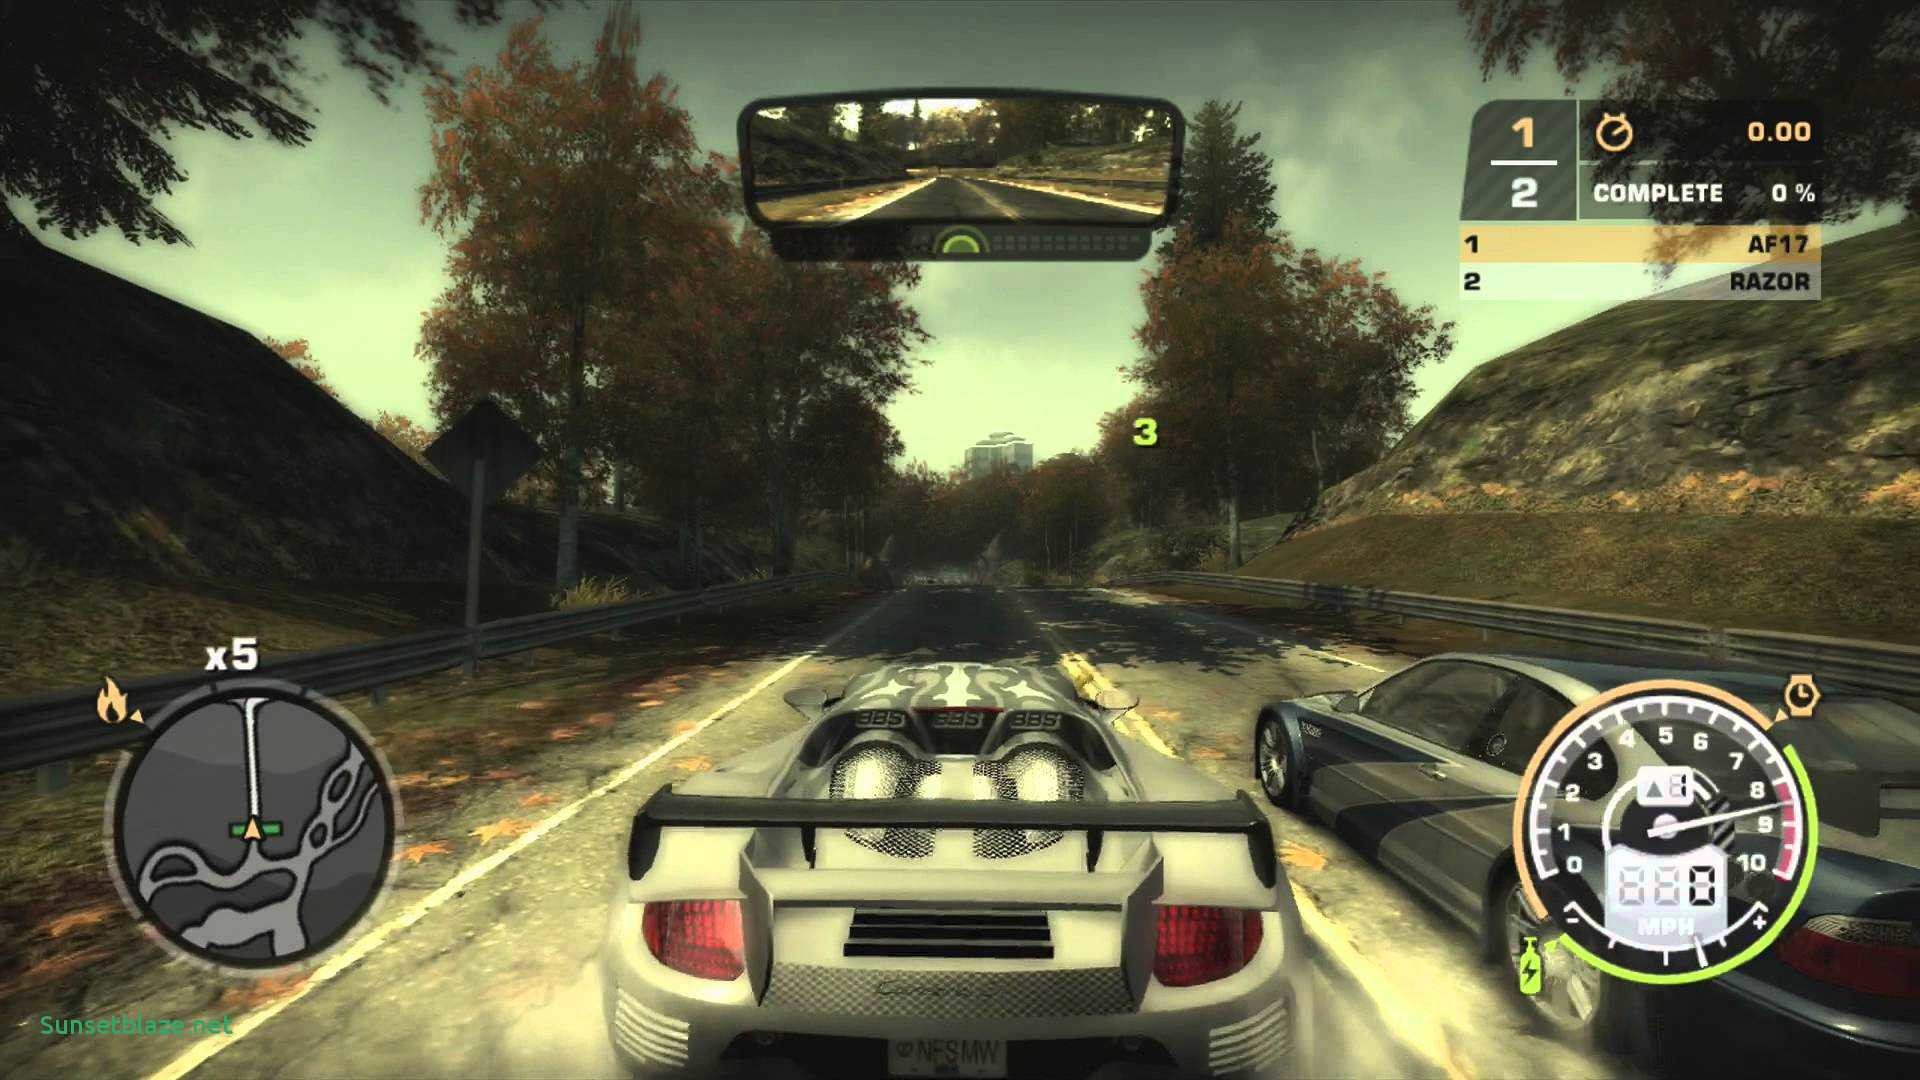 Nfs Most Wanted Wallpaper.